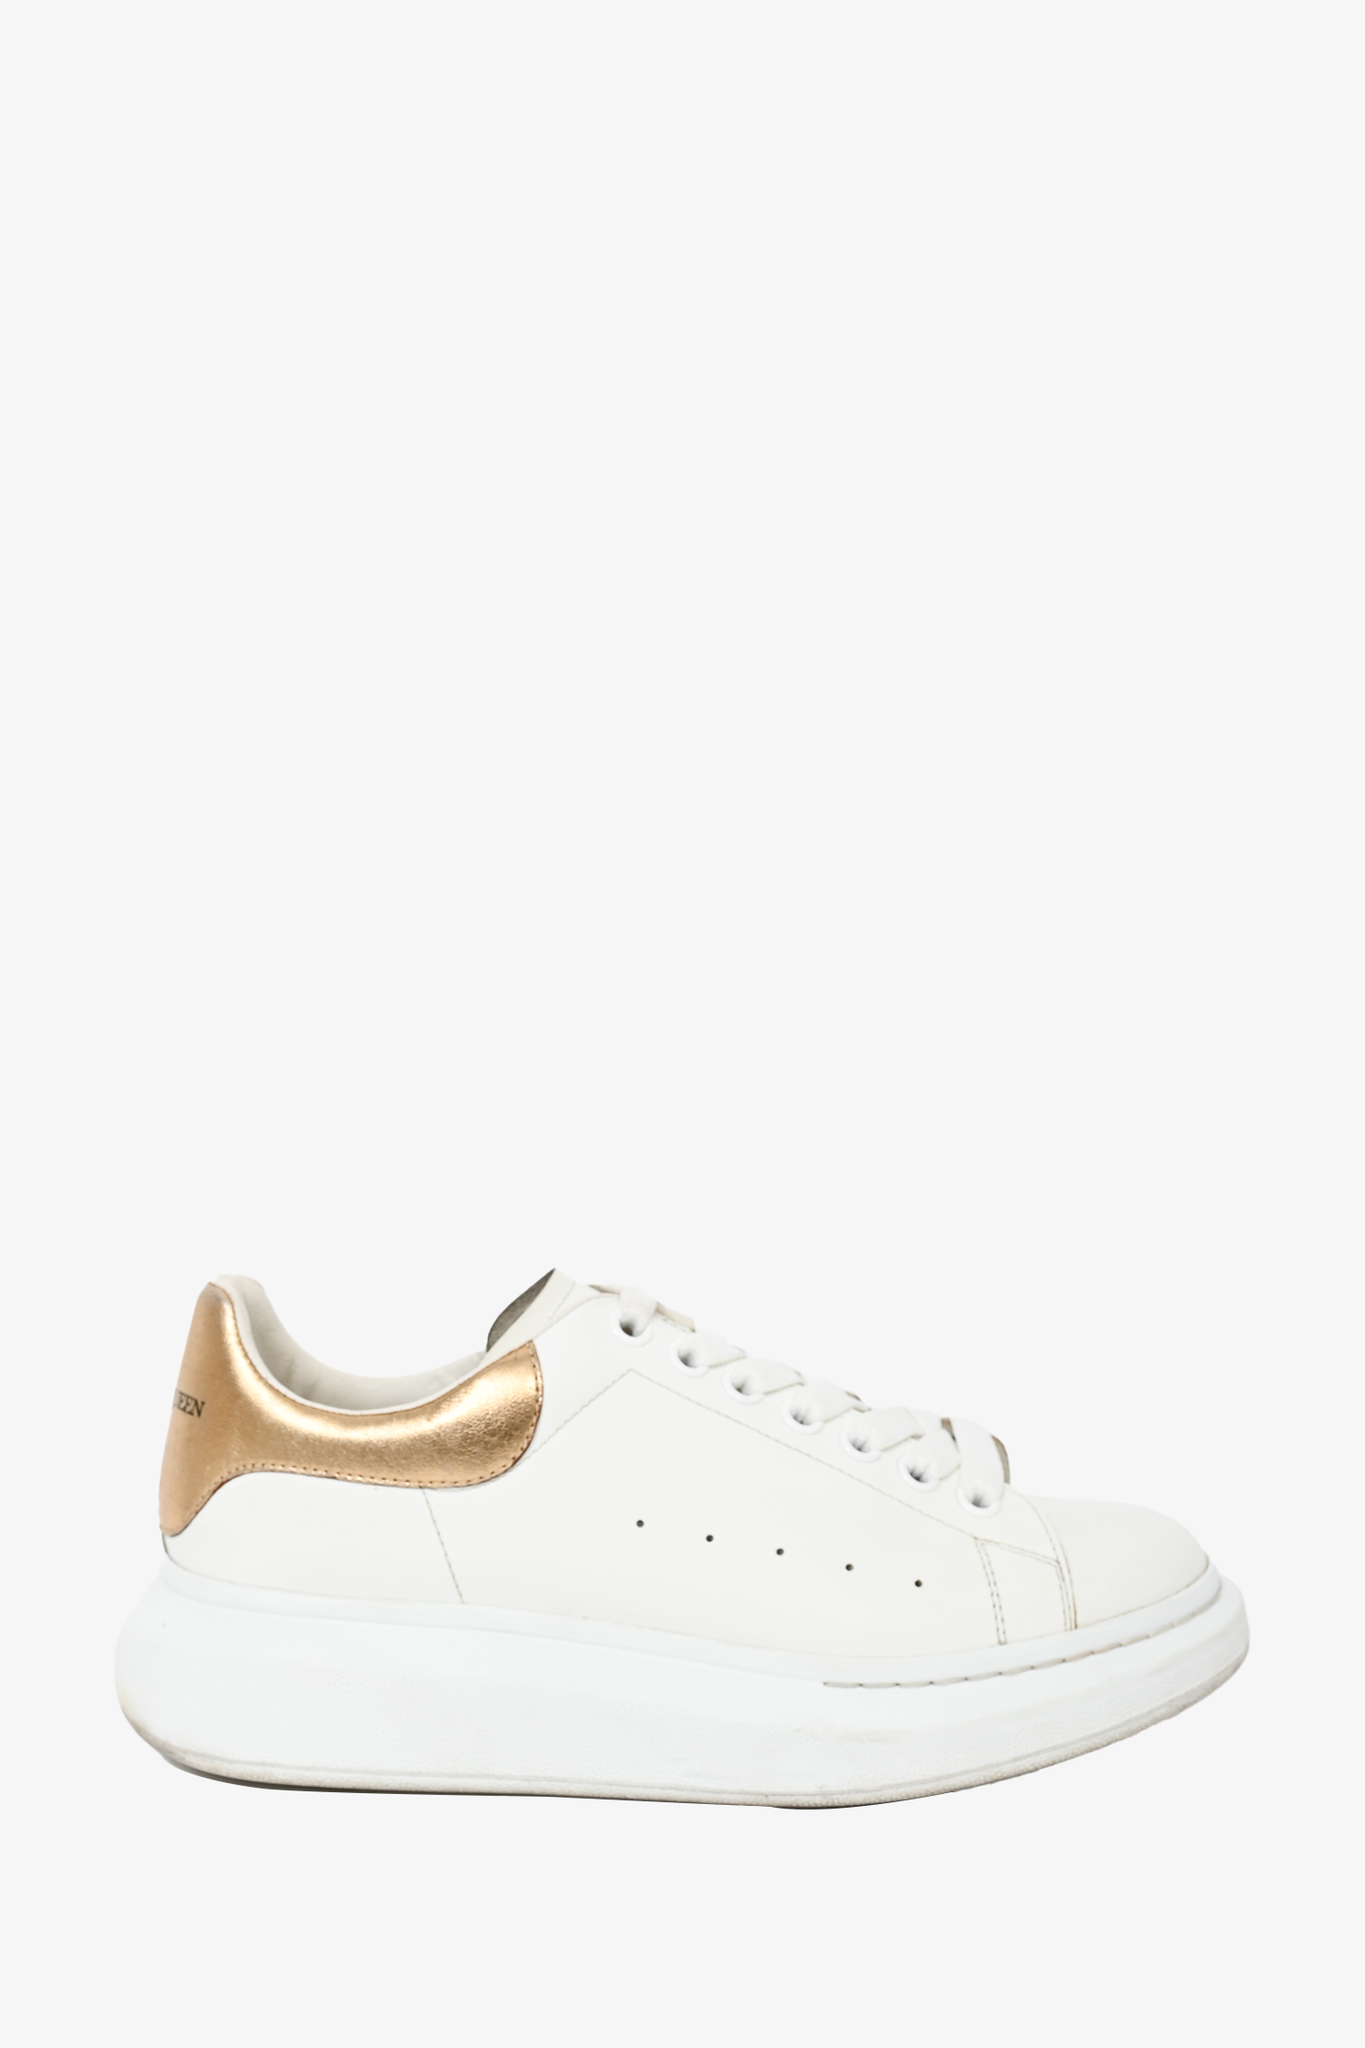 Buy Alexander McQueen Sneakers - White Rose Gold 171 At 33% Off |  Editorialist